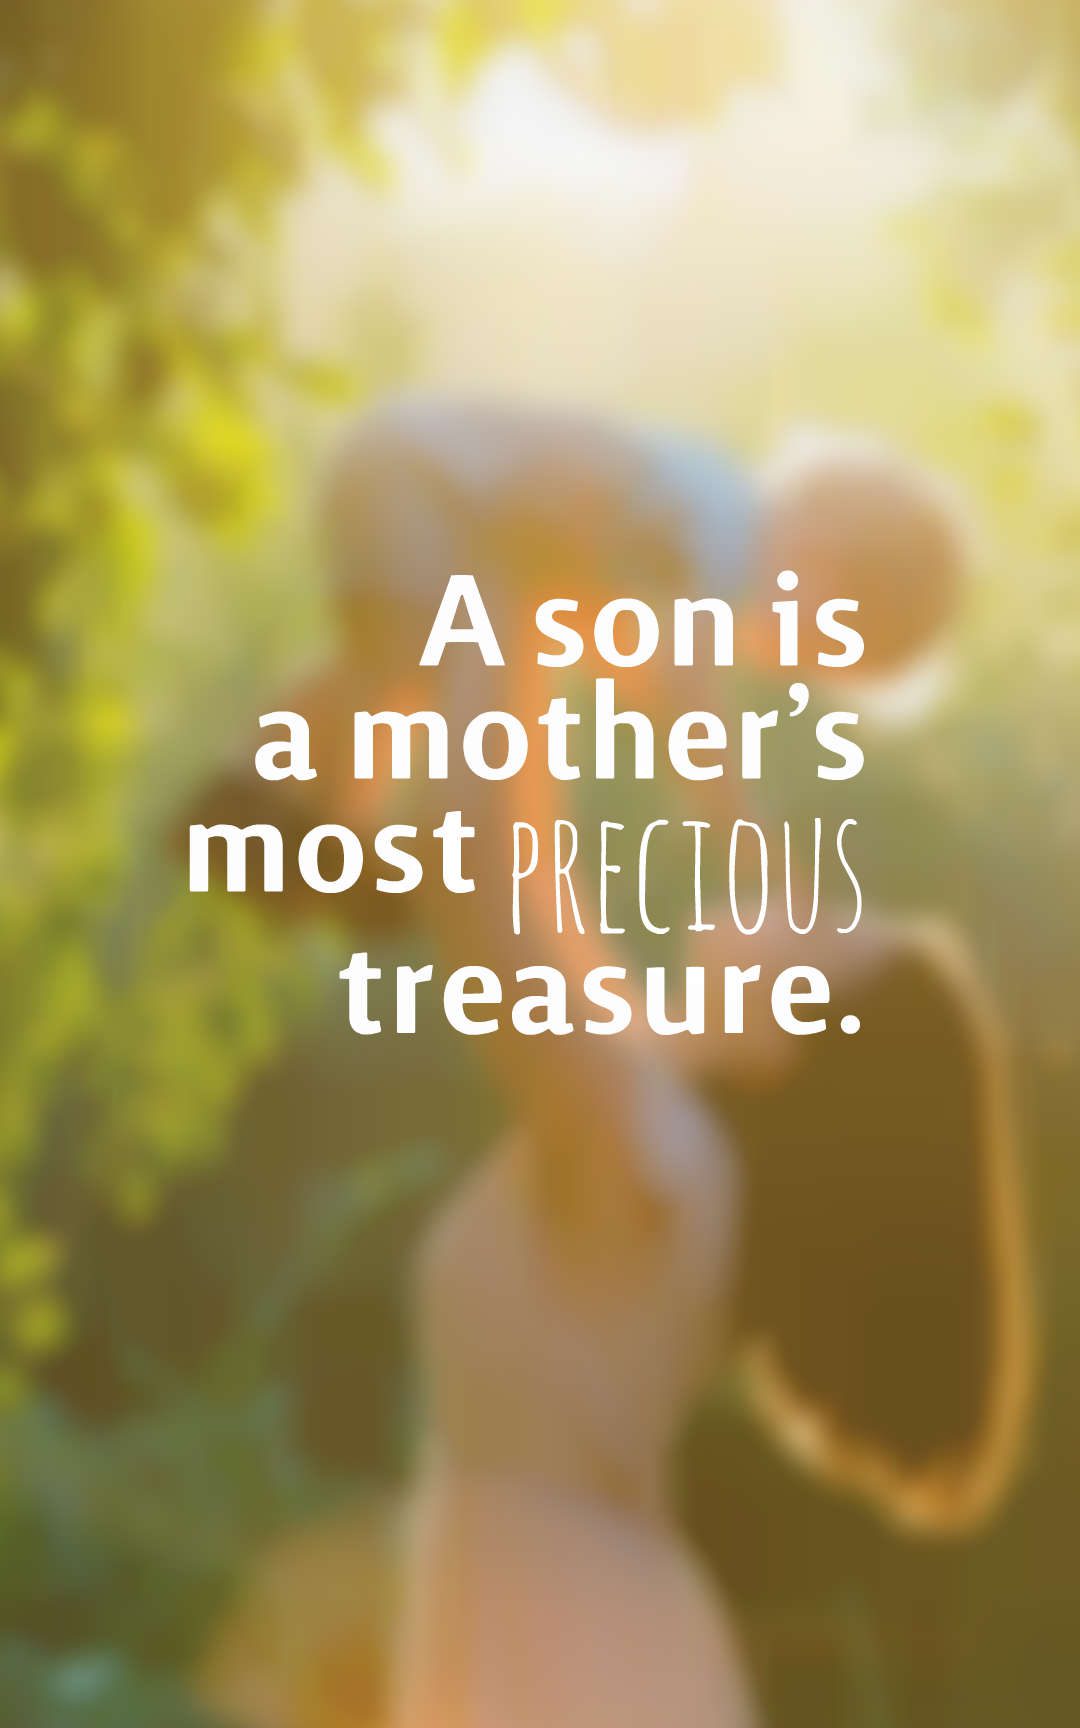 A son is a mother’s most precious treasure.